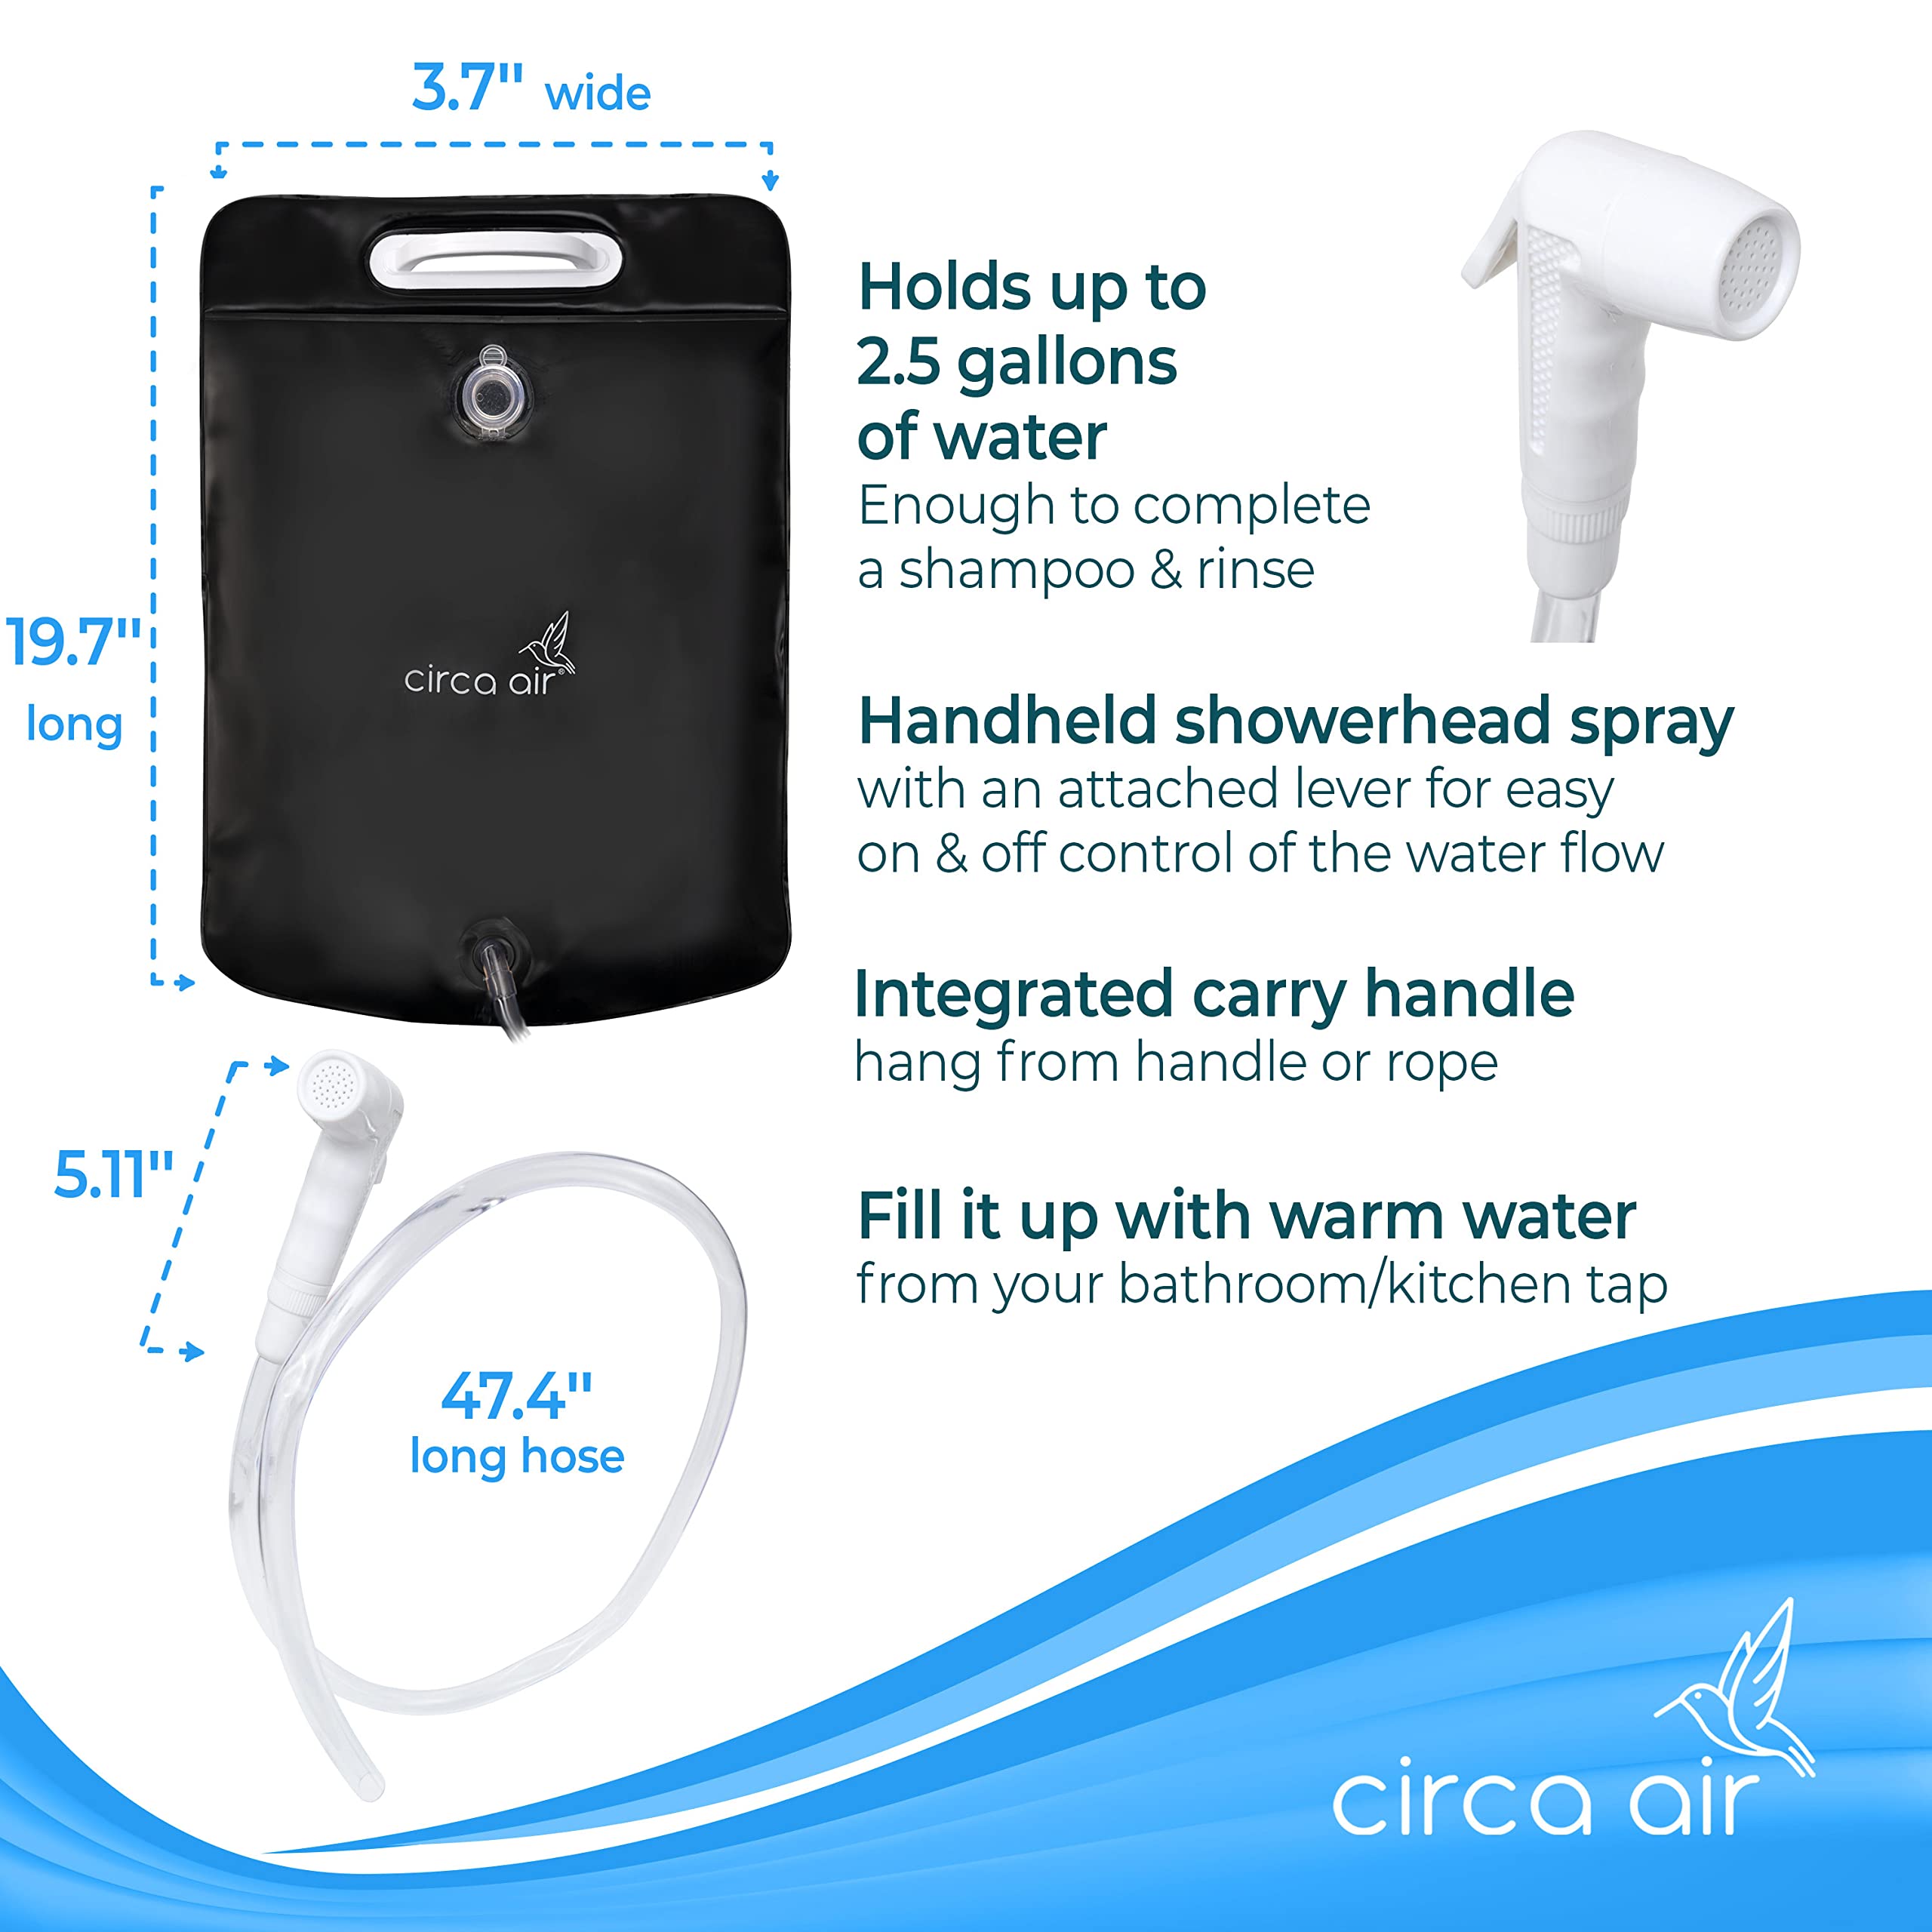 Circa Air Inflatable Hair Washing Basin and Shower Bag for Bedridden, Portable Shampoo Bowl for Home, Mobile Hair Washing Station, Portable Sink for Washing Hair in Bed, Elderly Aid Hair Washing